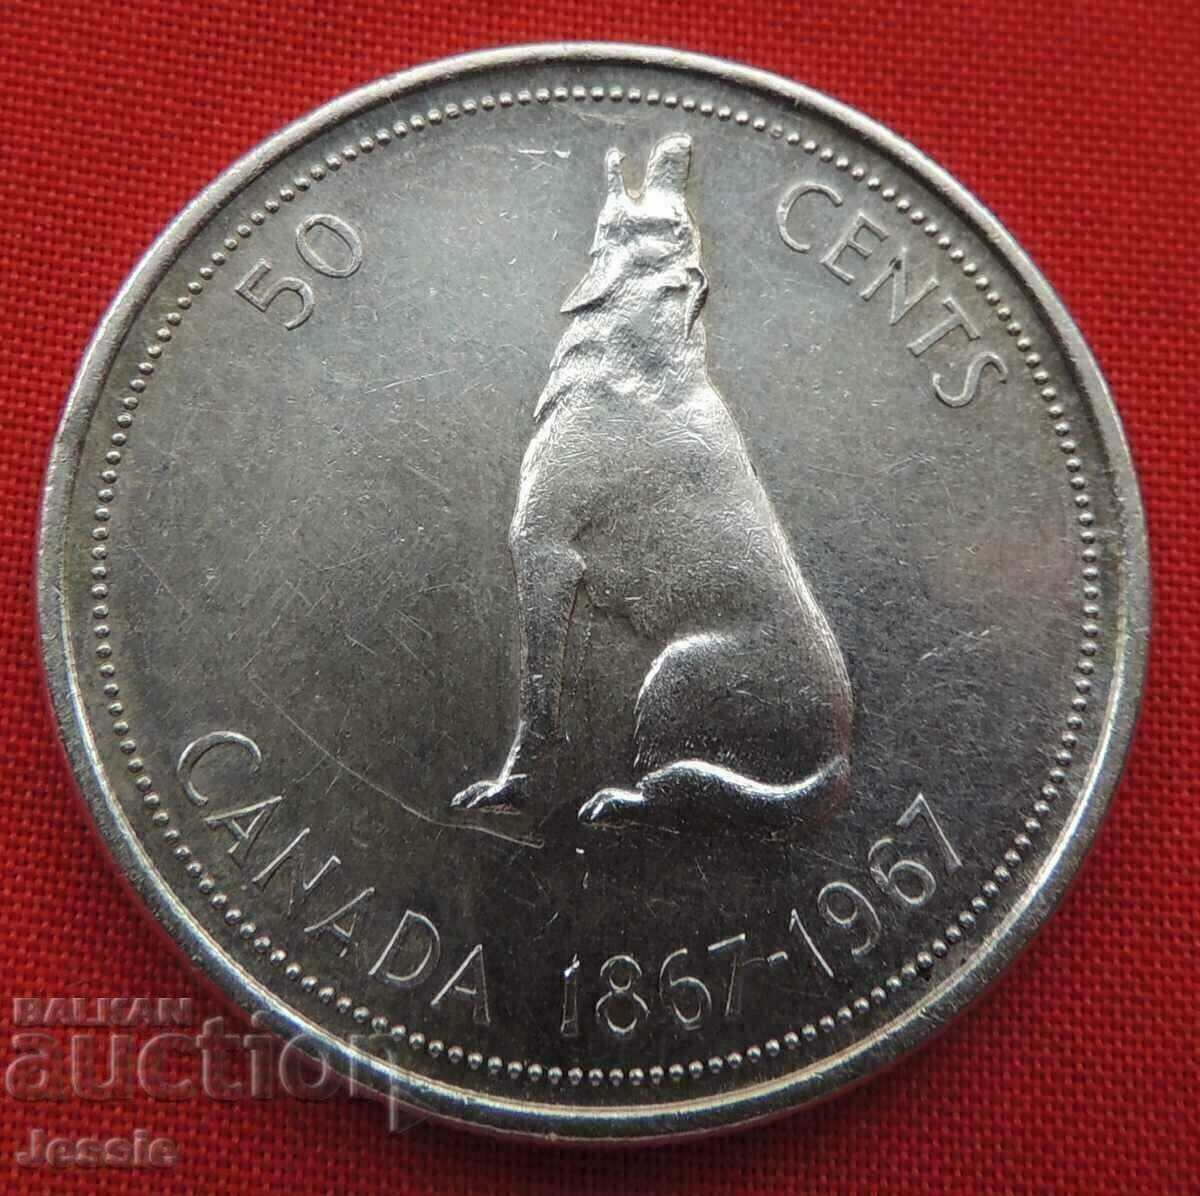 50 cents 1967 Canada